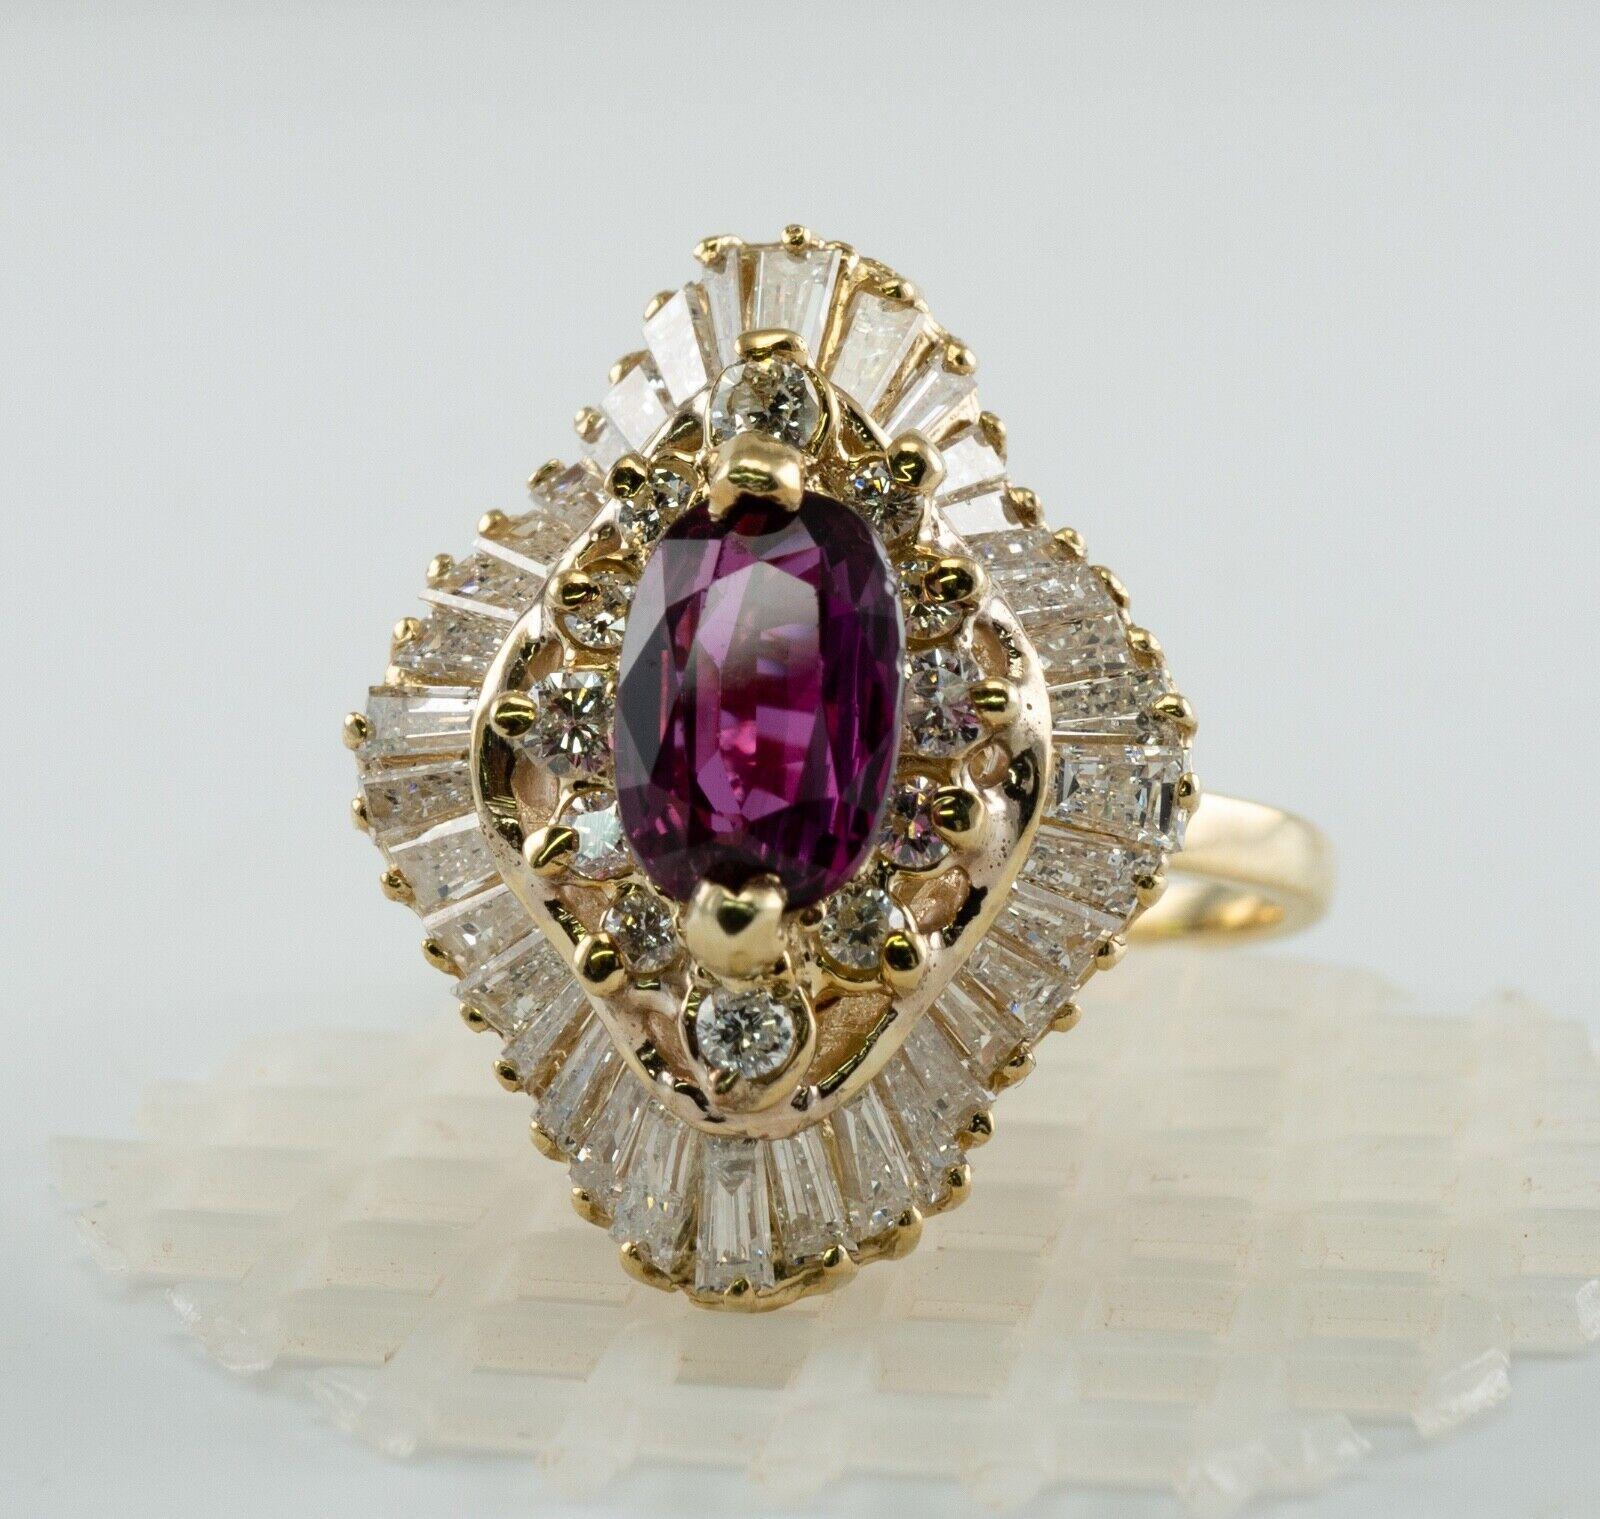 Diamond Rubellite Pink Tourmaline Ring Vintage 14K Gold Ballerina Statement

This estate ring is made in solid 14K Yellow Gold.
The center natural Earth mined Rubellite measures 8x6mm (1.18 carats).
This is a very clean gem with great intensity. It